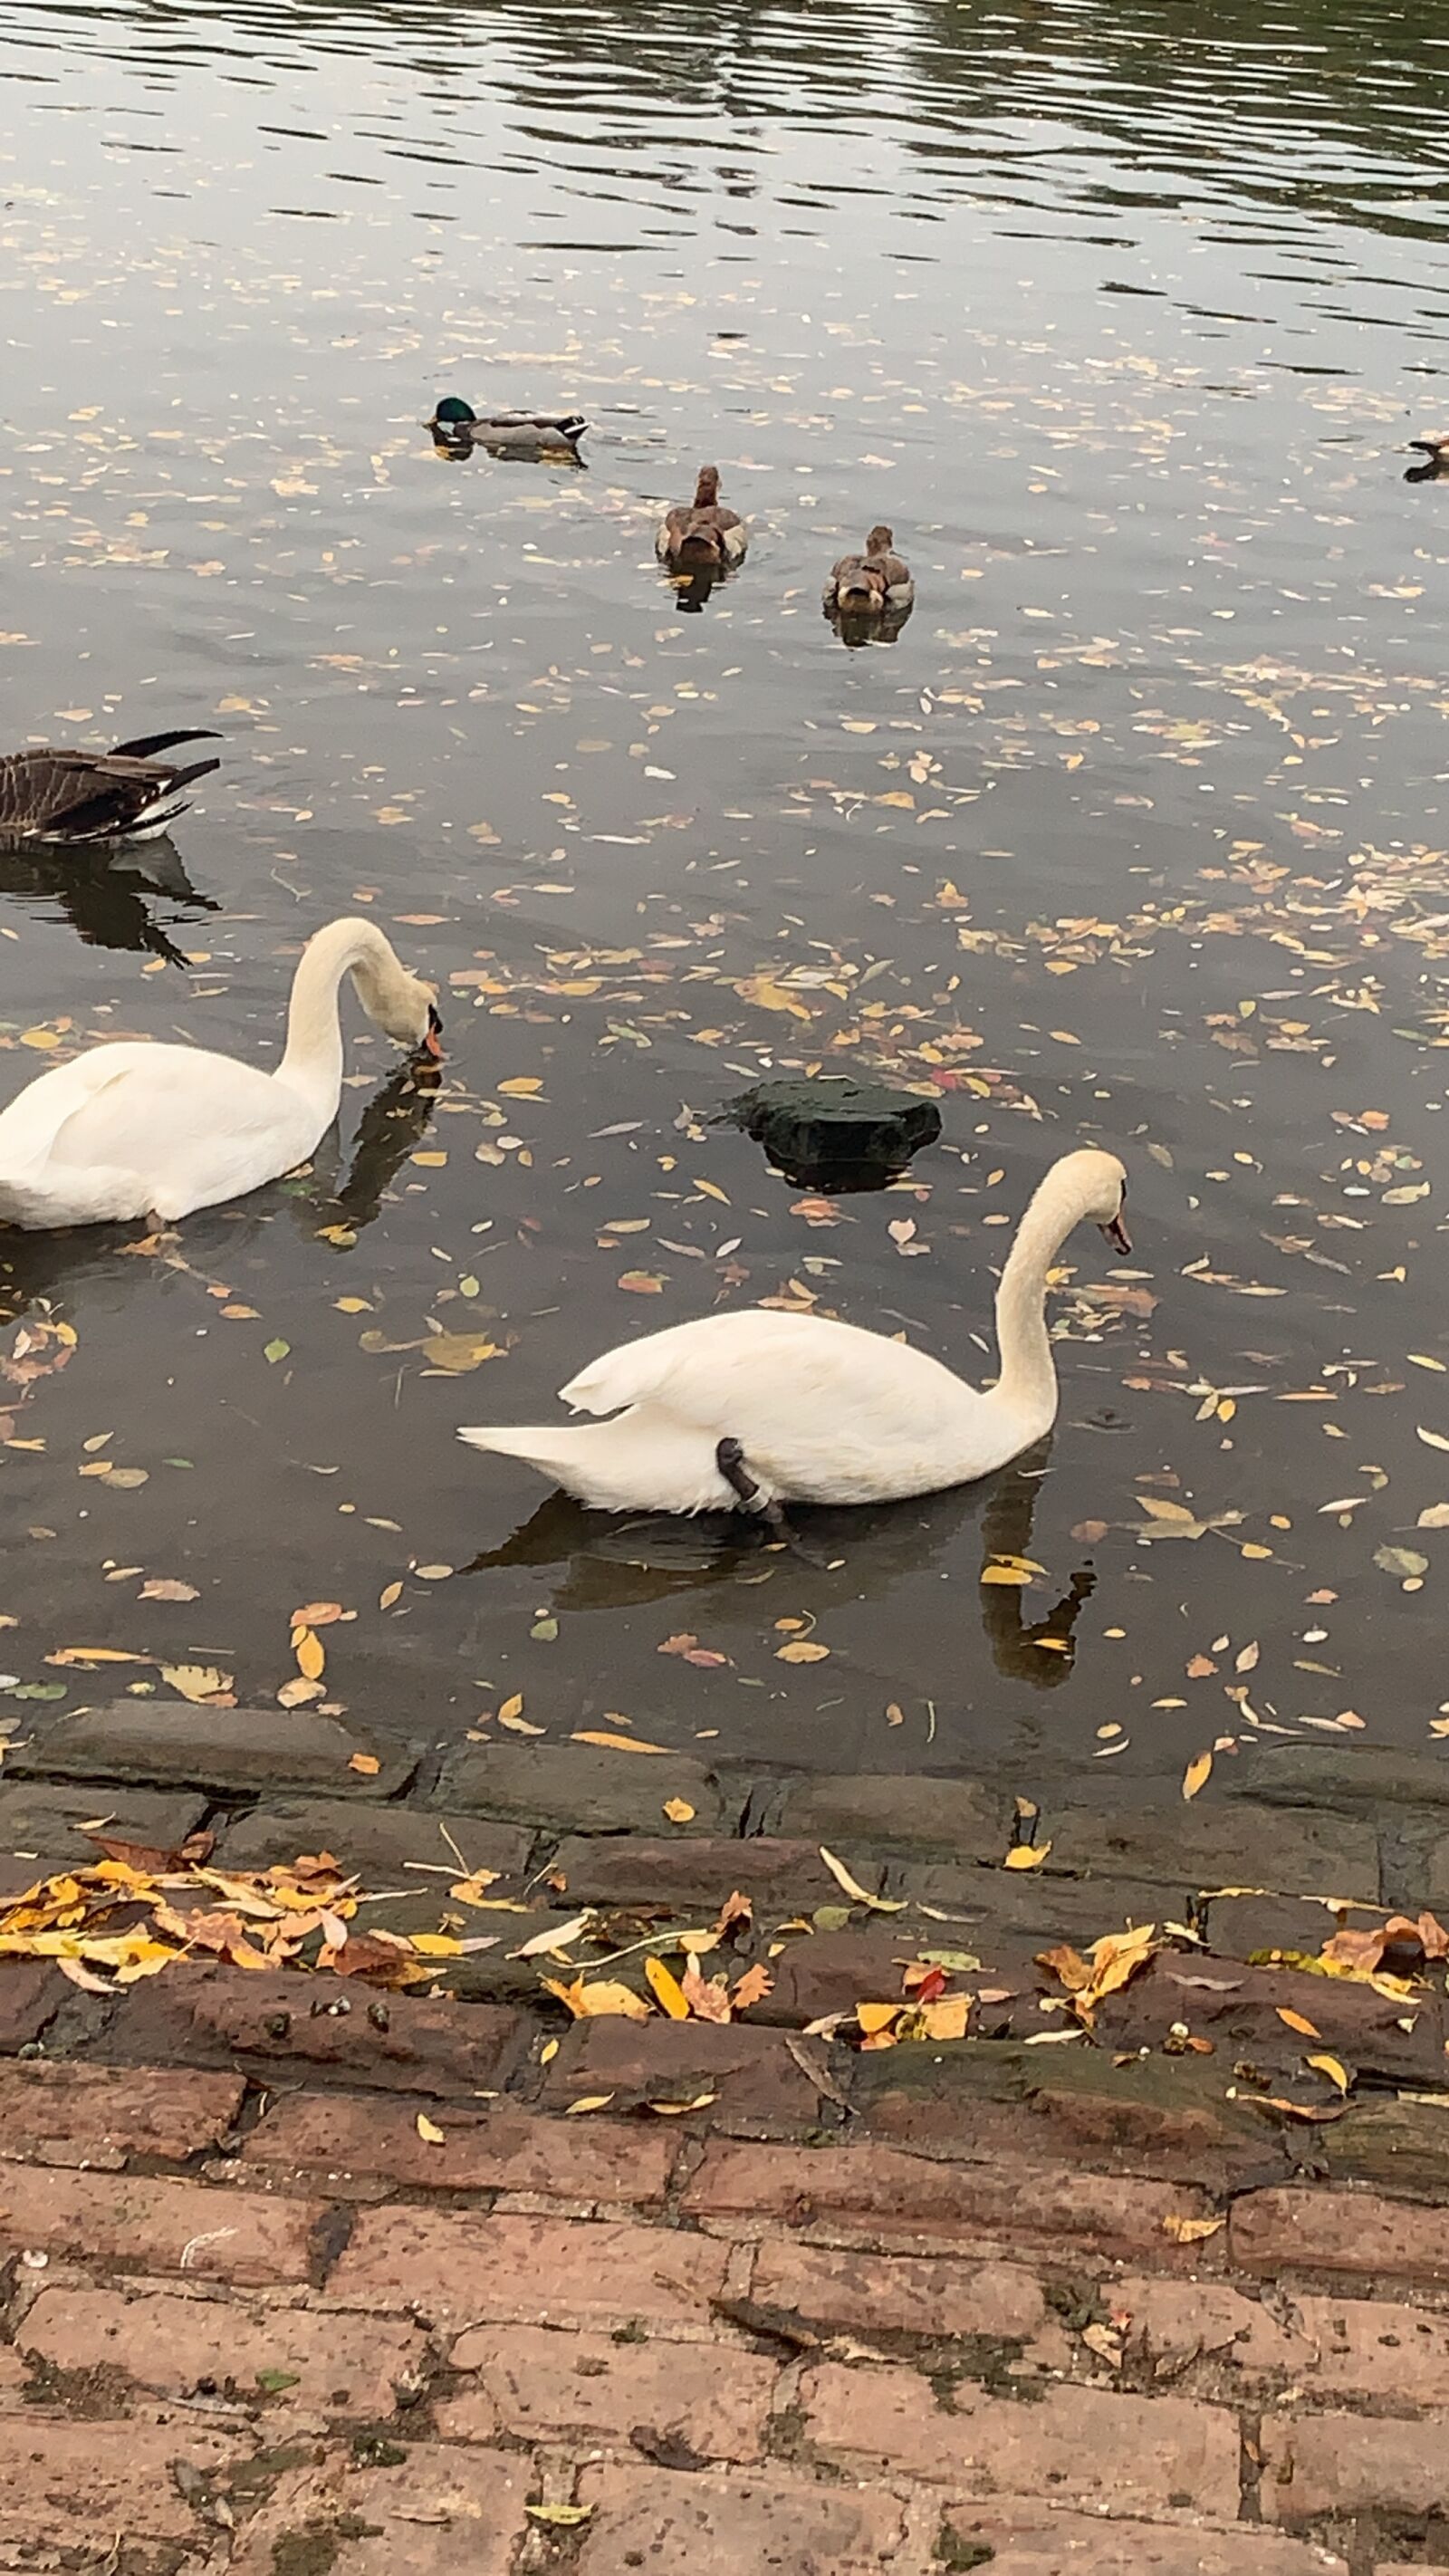 Apple iPhone XS Max + iPhone XS Max back camera 4.25mm f/1.8 sample photo. Swan, river, germany photography